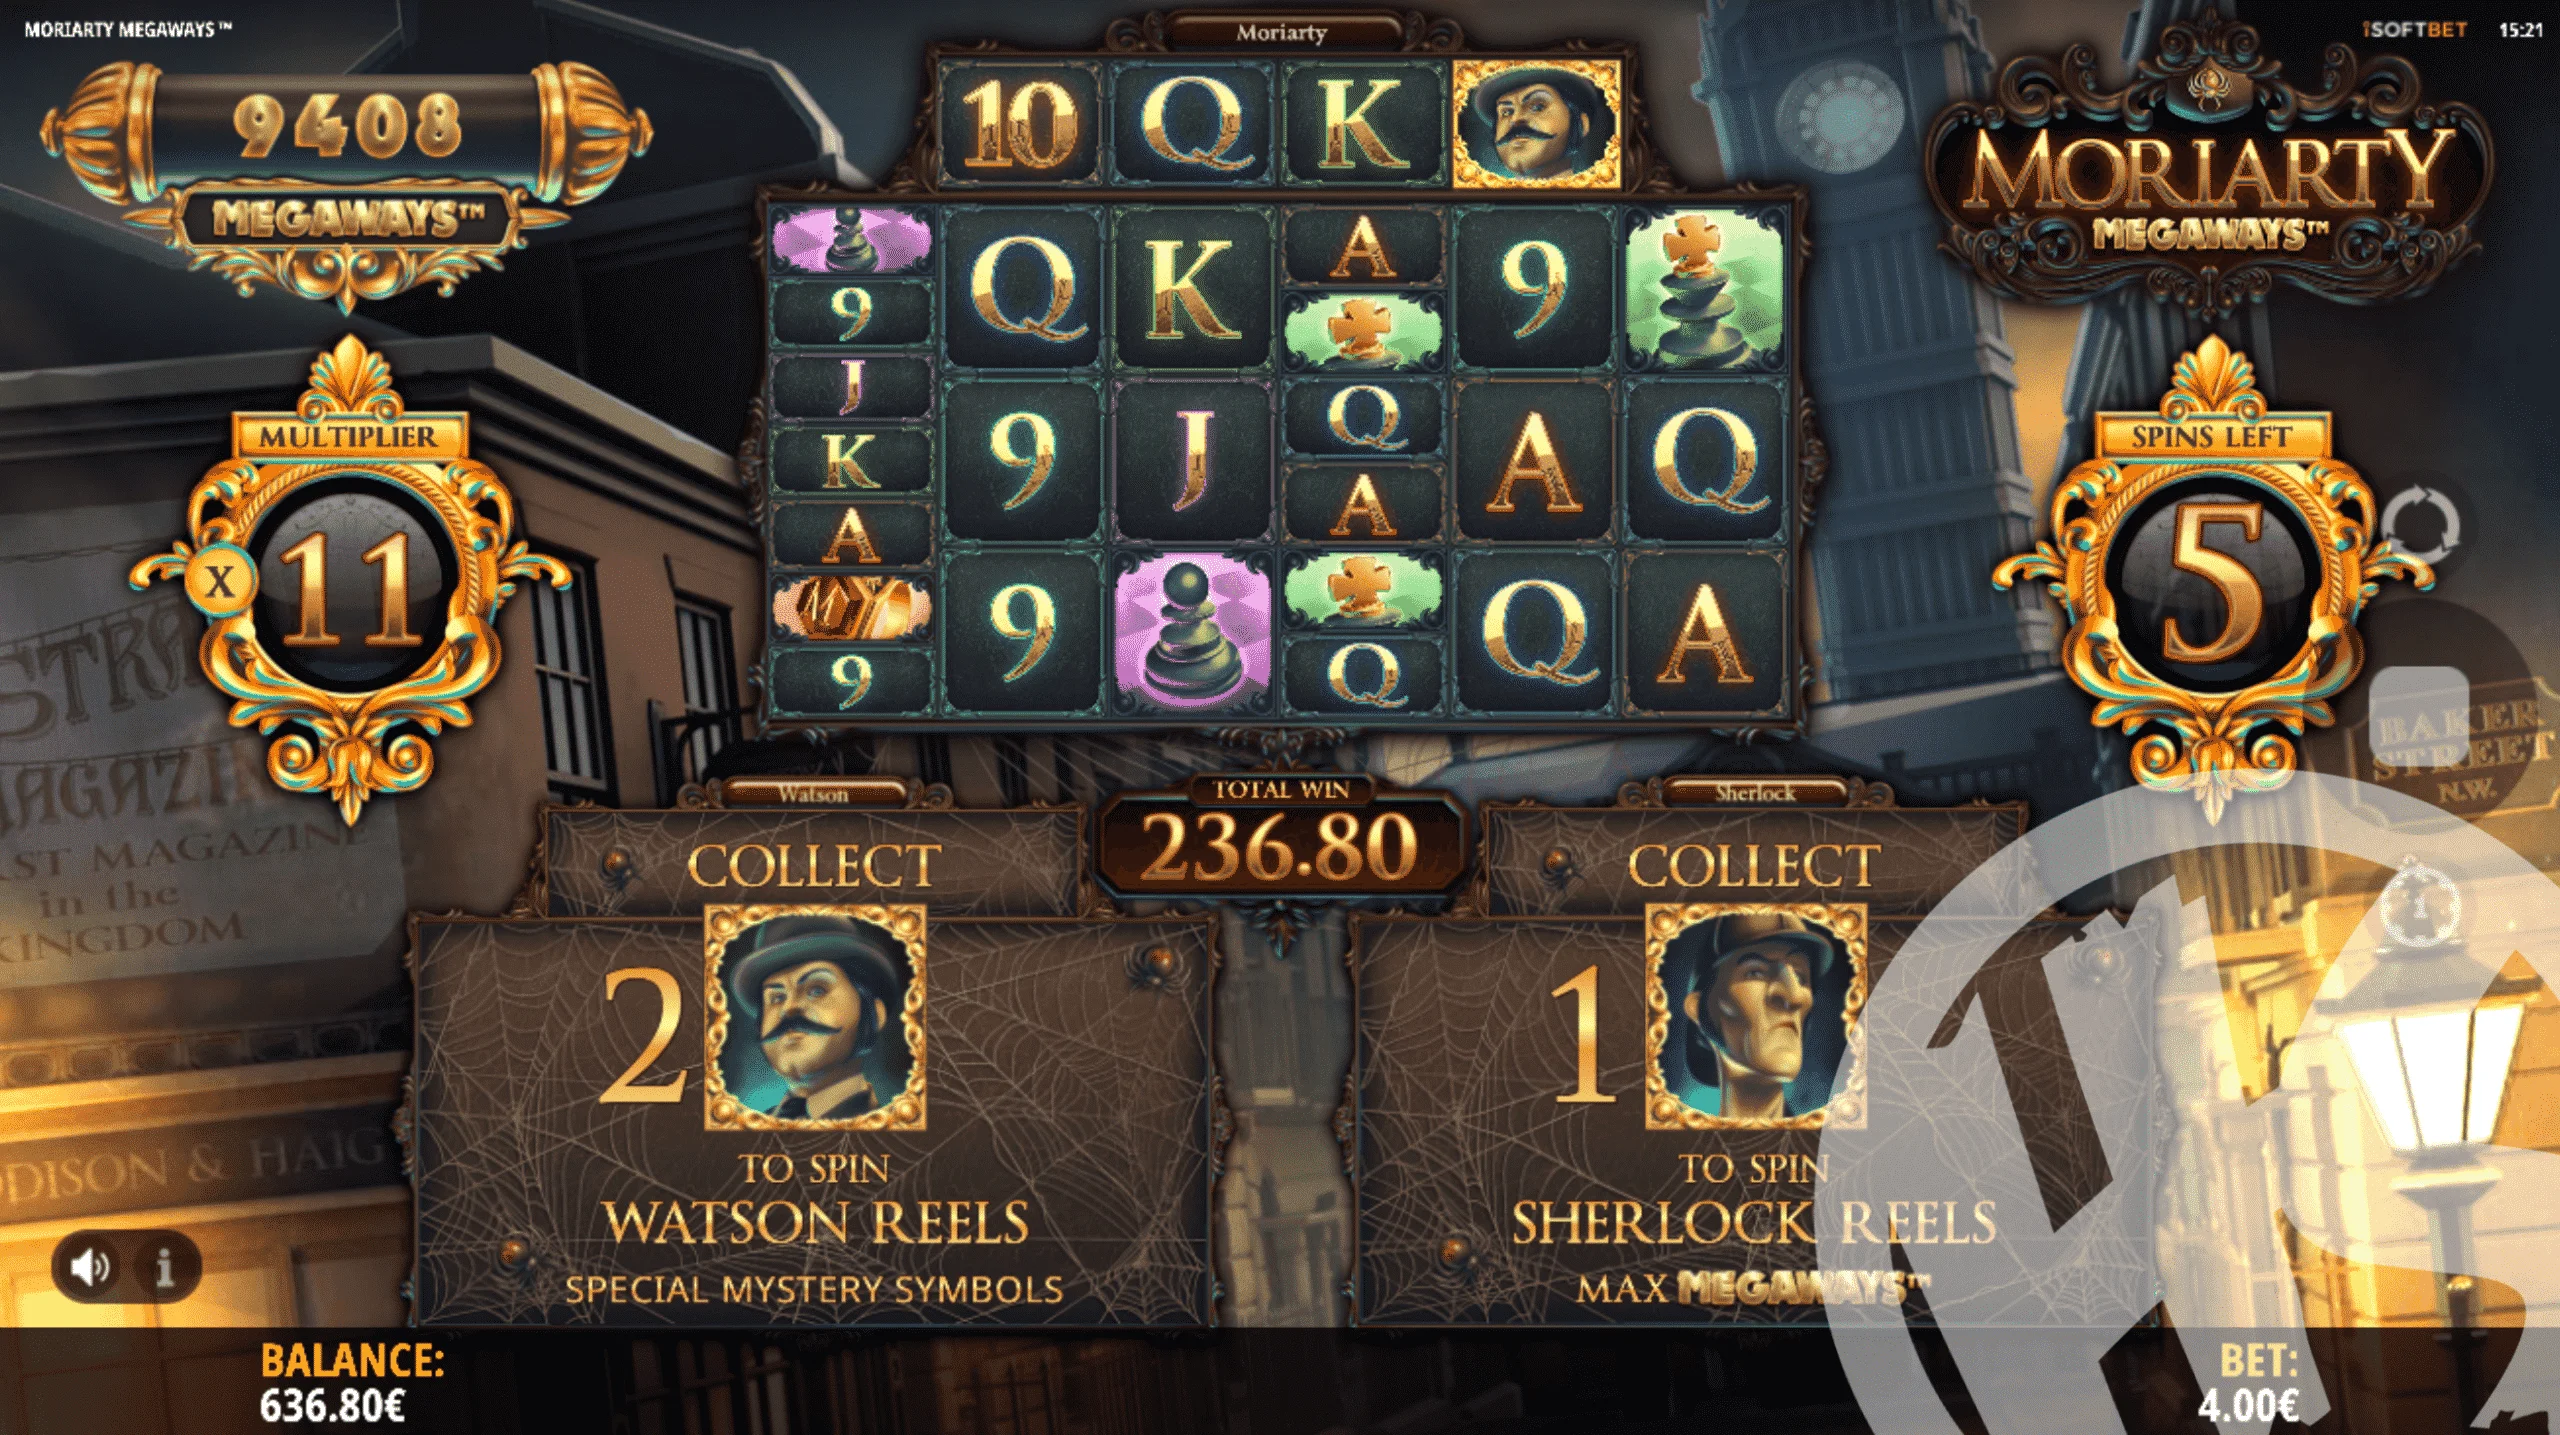 Moriarty Megaways Free Spins